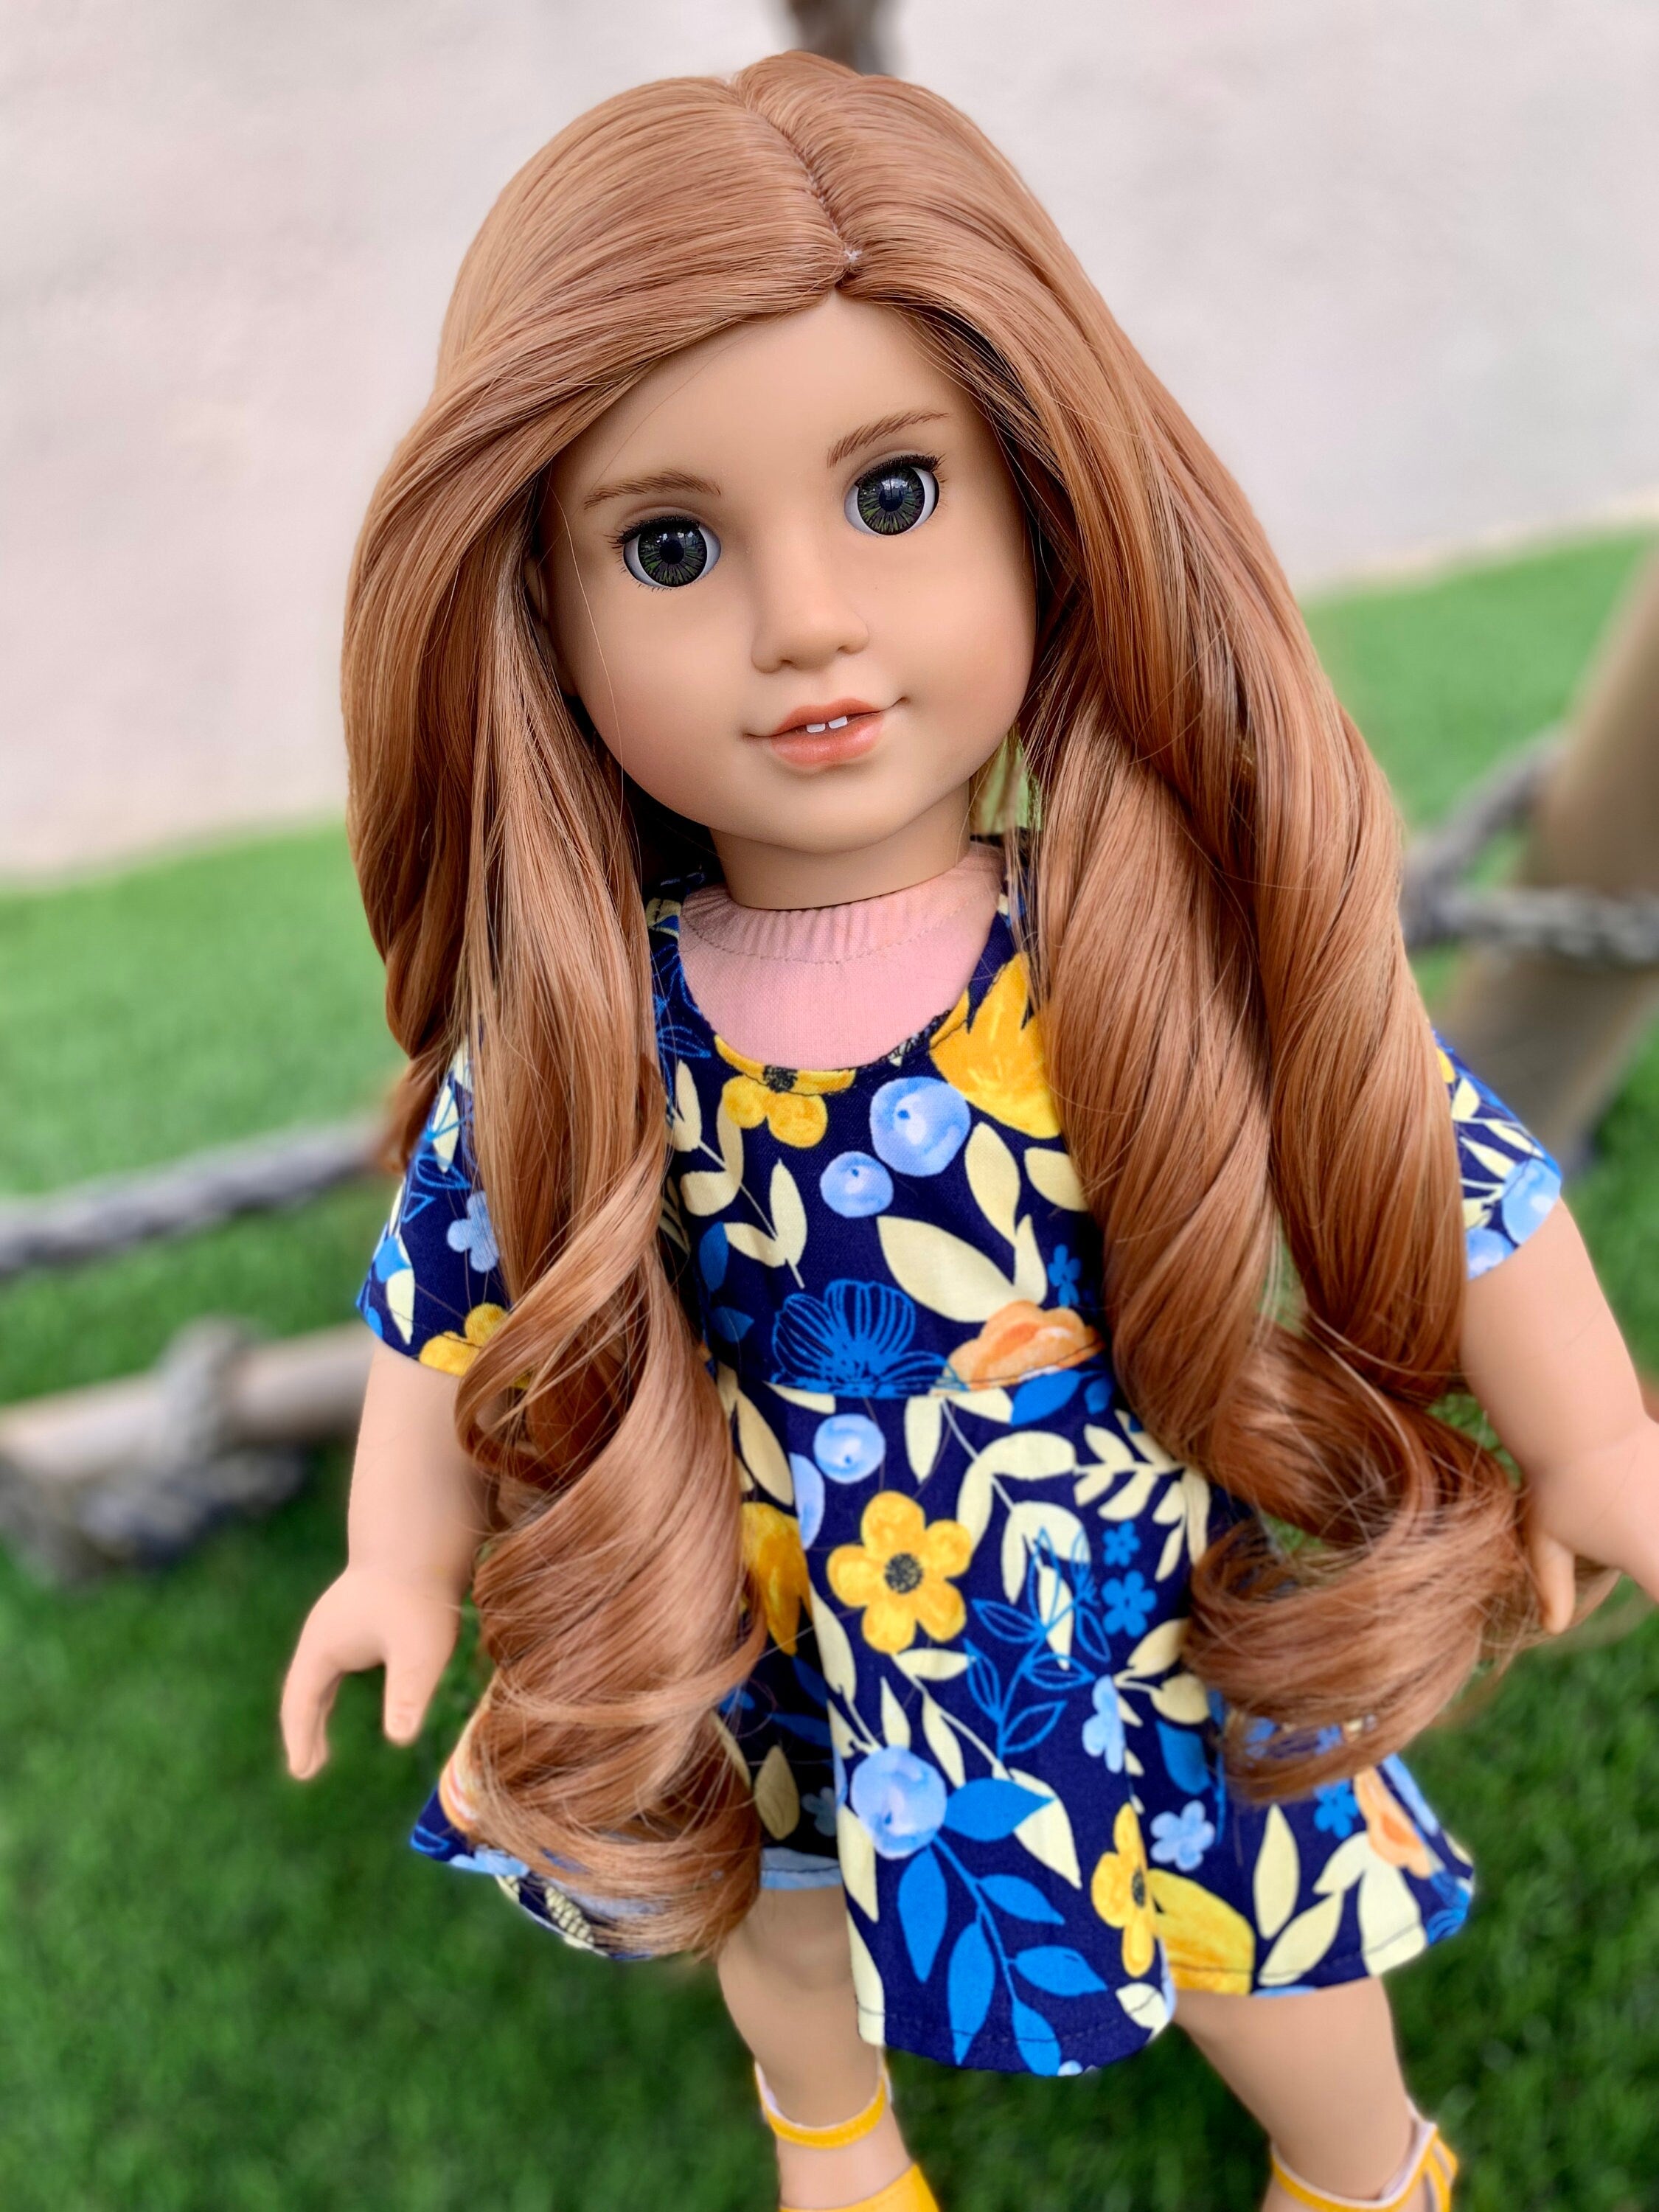 Custom OMBRE Doll Wig for 18" American Girl Doll Heat Safe Tangle Resistant - fits 10-11" head size of all 18" dolls